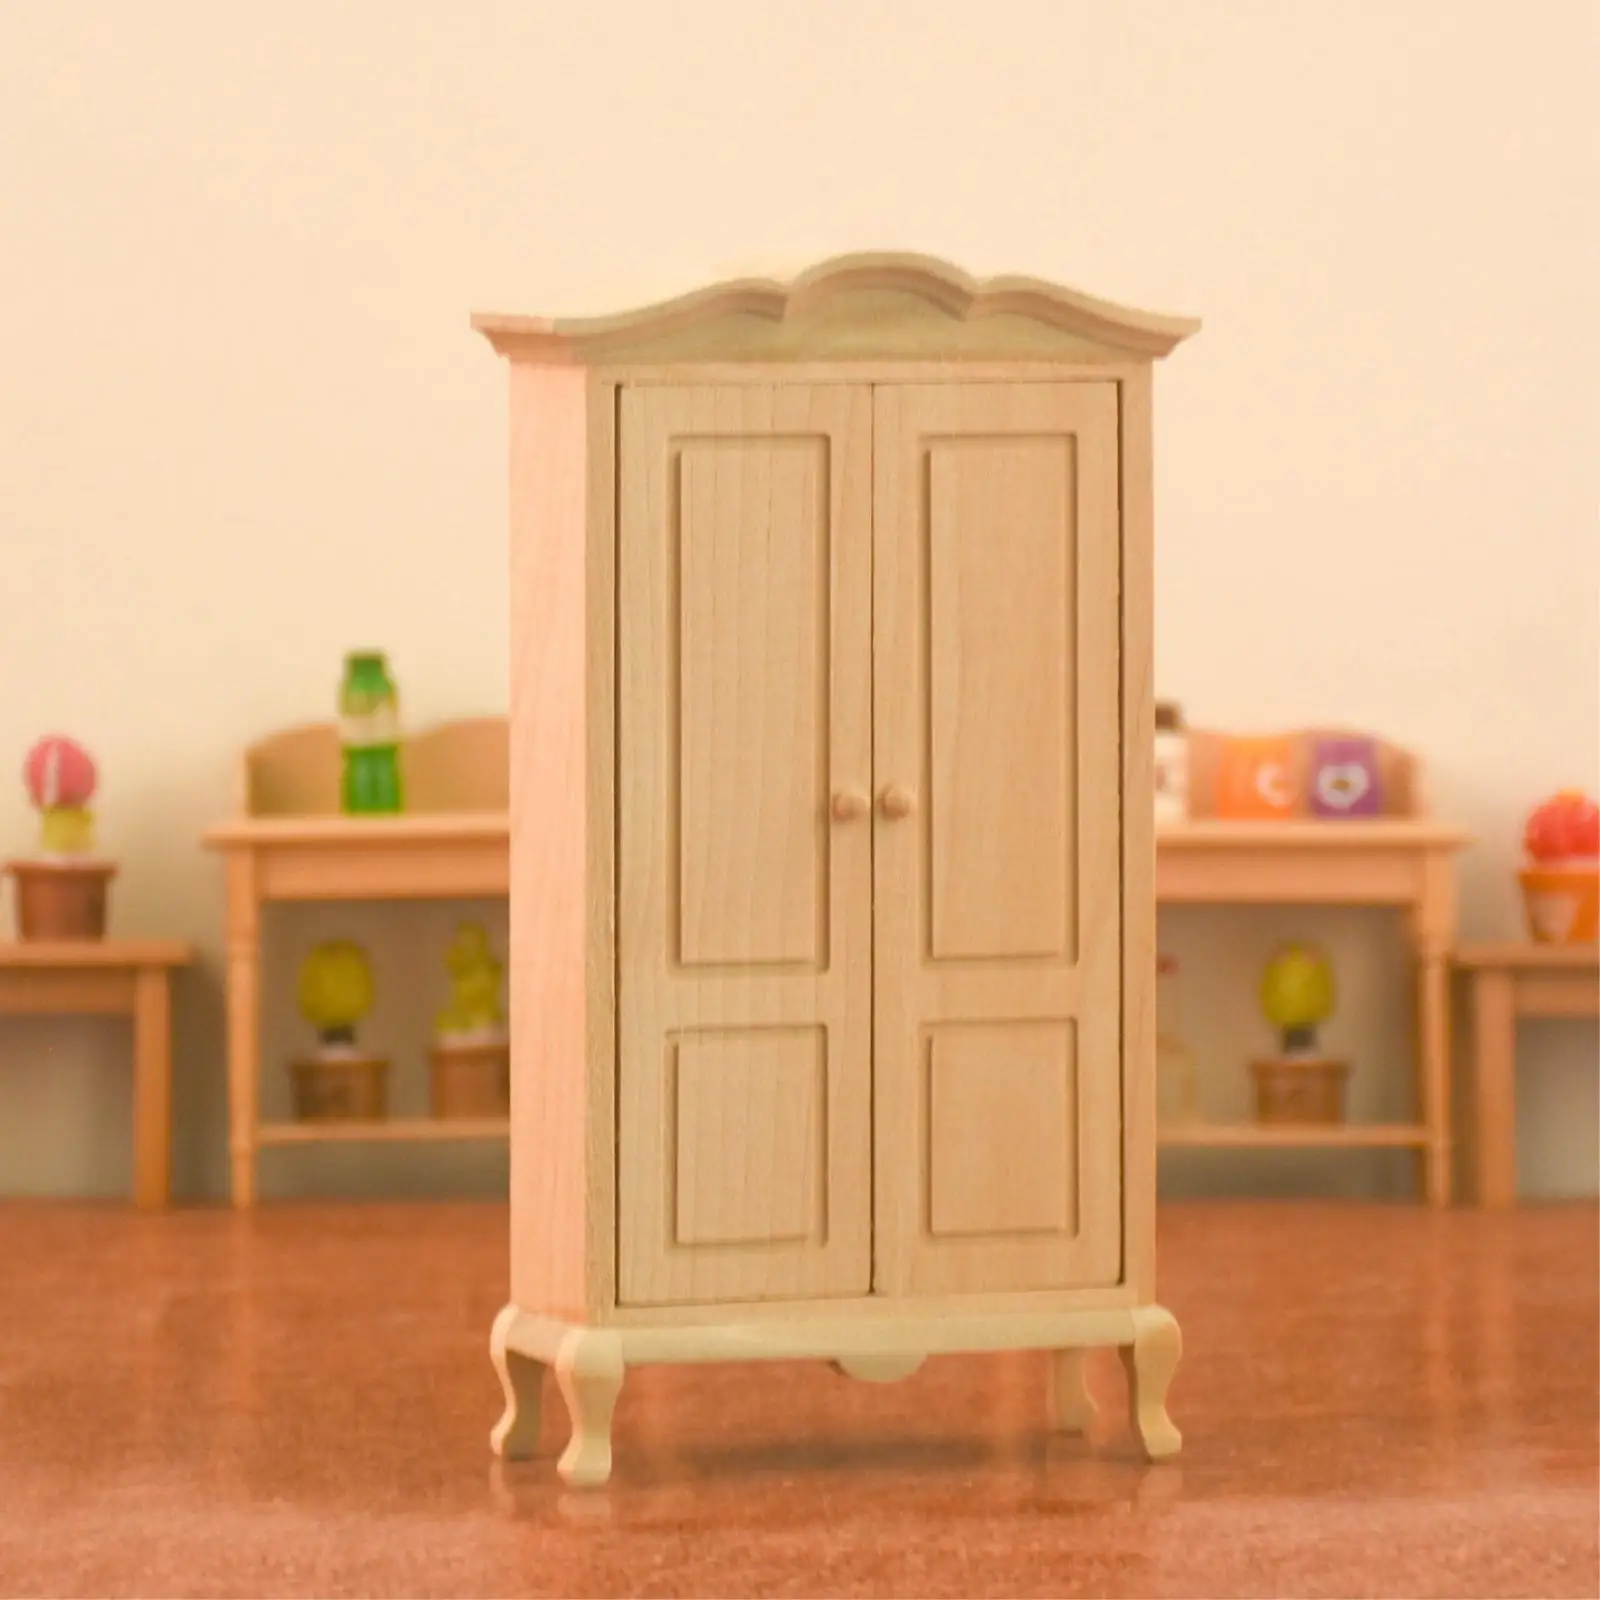 Exquisite Wardrobe 1:12 Dollhouse Miniature Living Room Furniture Life Scene Model Toy Bedroom Ornaments